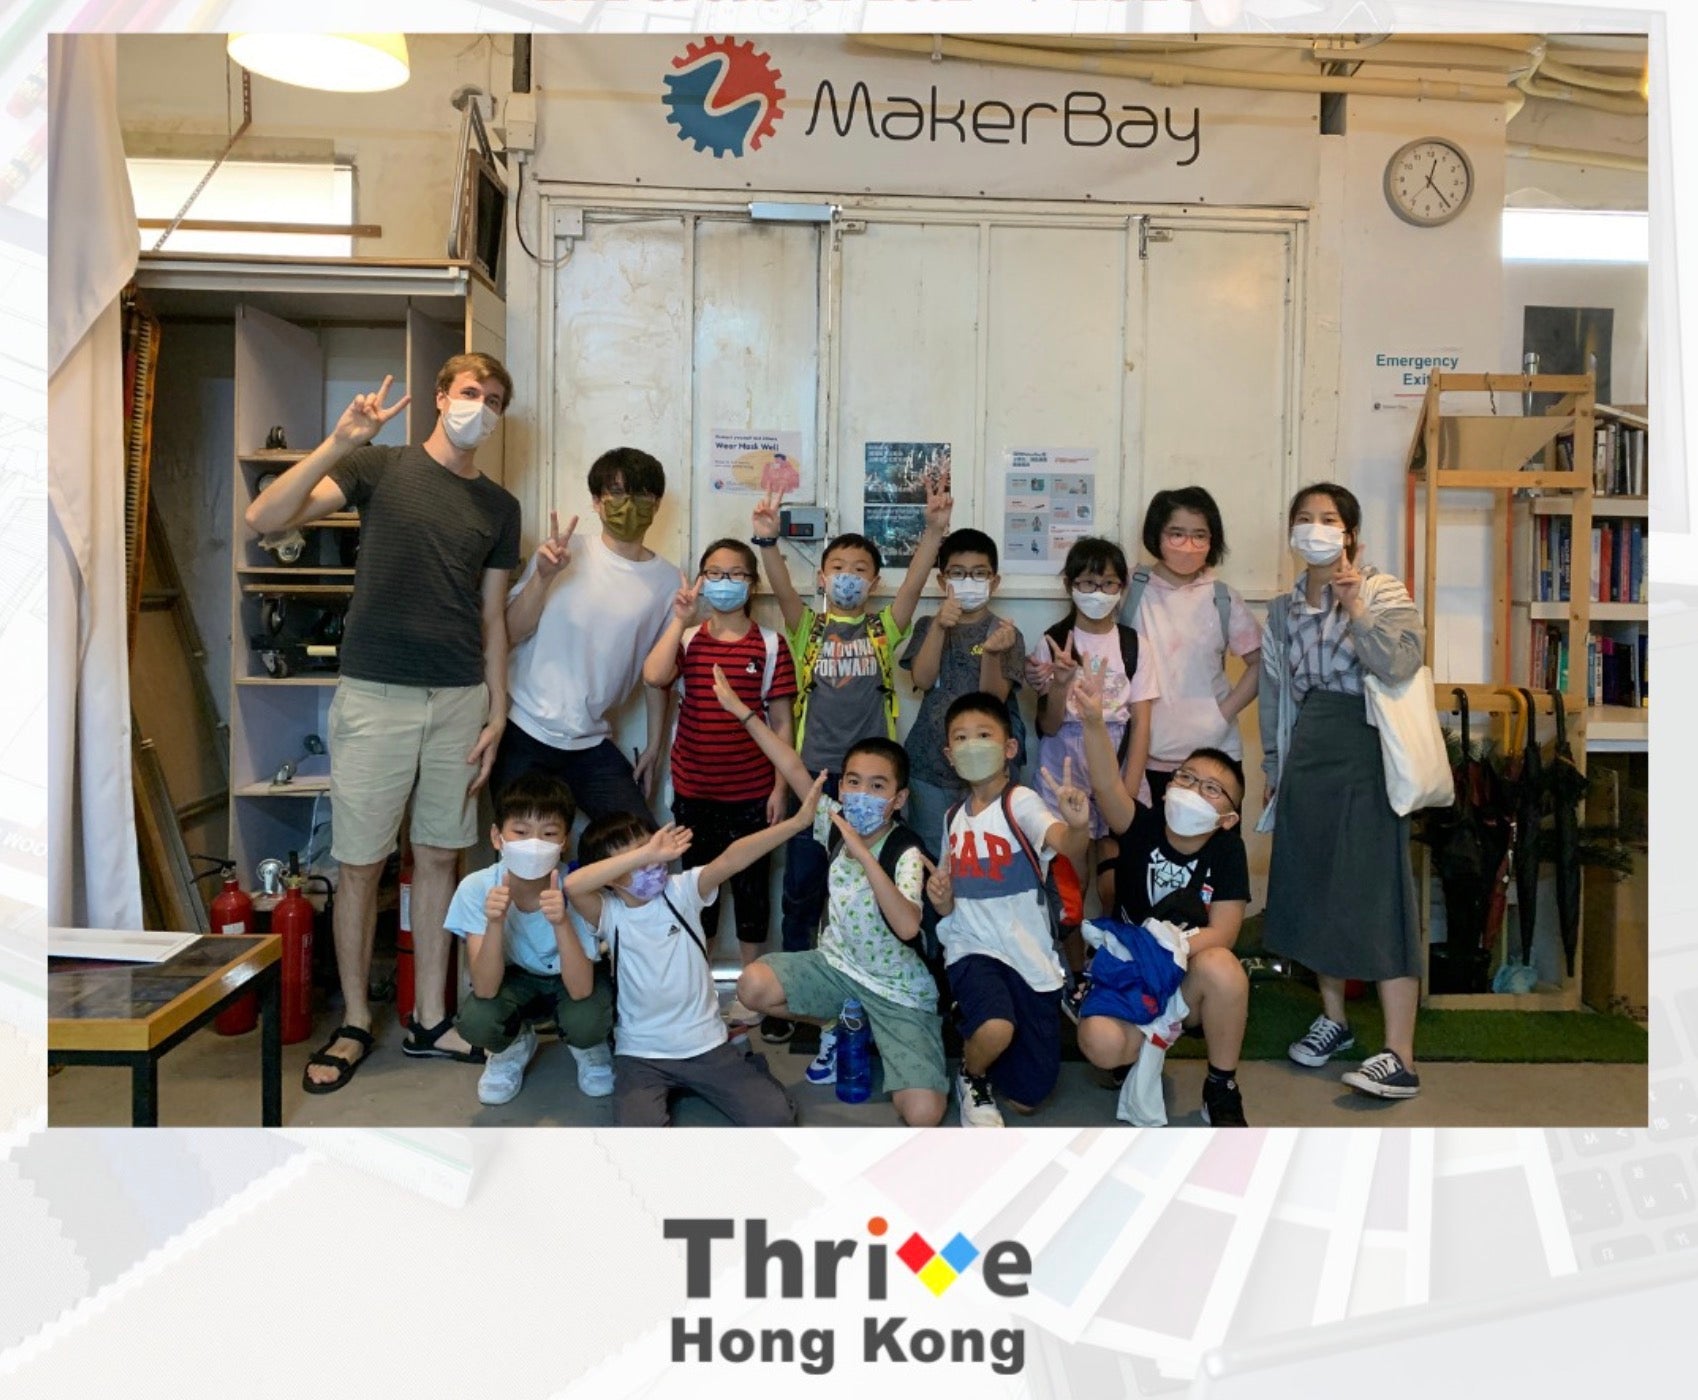 UNITEK Is Delighted To Sponsor Thrive Hong Kong For A Meaningful Event